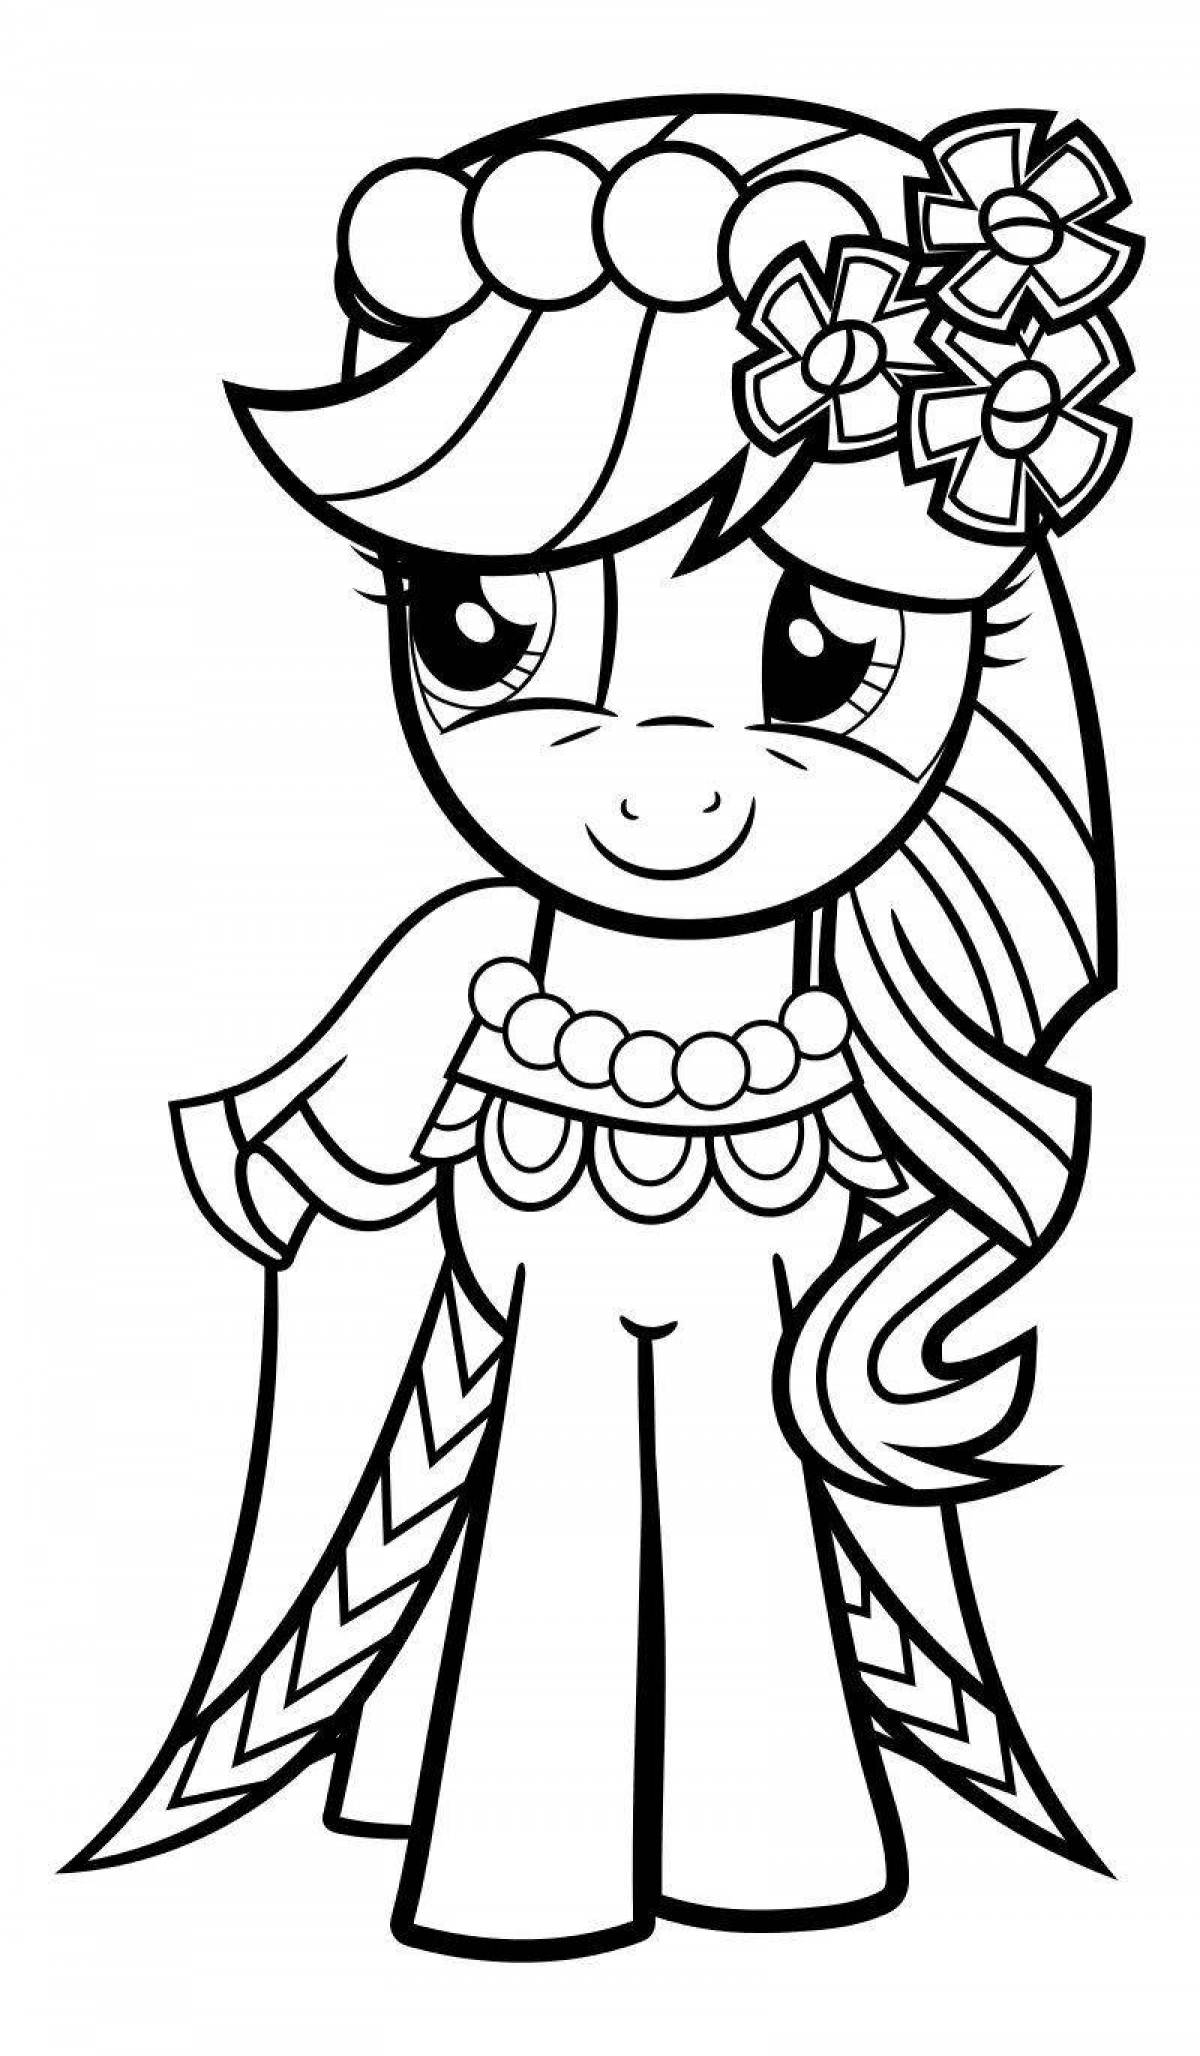 Violent pony coloring in a dress